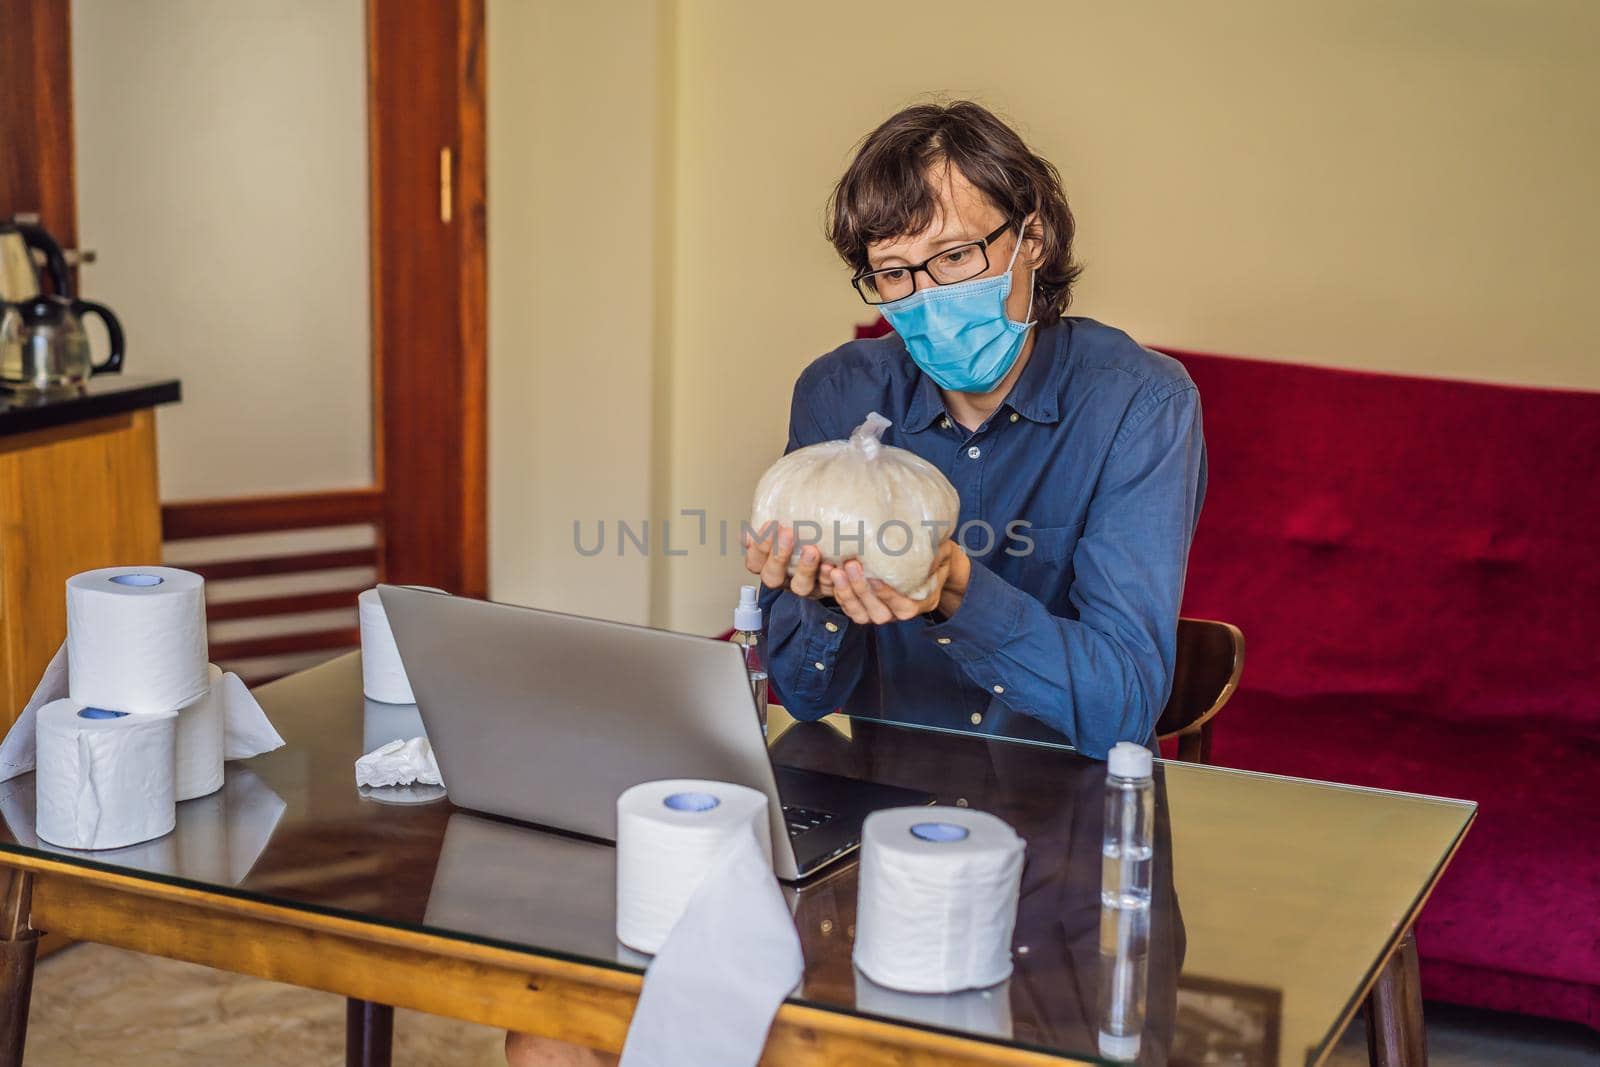 Coronavirus. Man working from home wearing protective mask. quarantine for coronavirus wearing protective mask. Working from home. Cleaning with sanitizer gel. Bought a lot of toilet paper and rice.